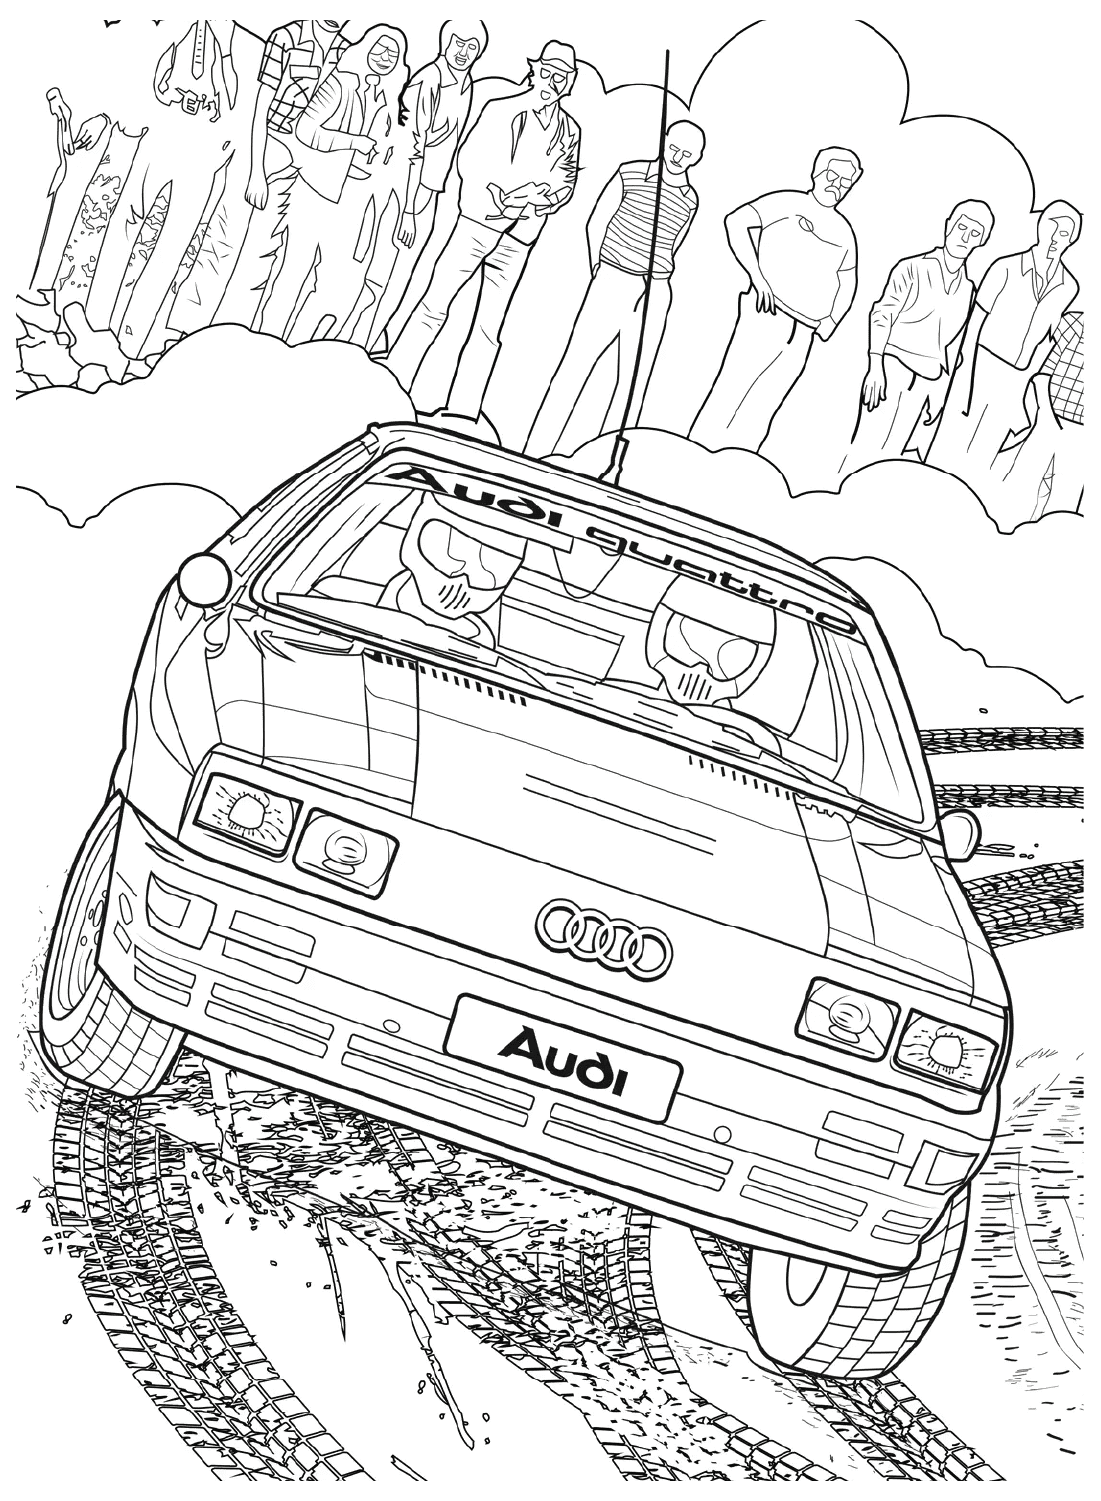 Audi Images to Color from Audi